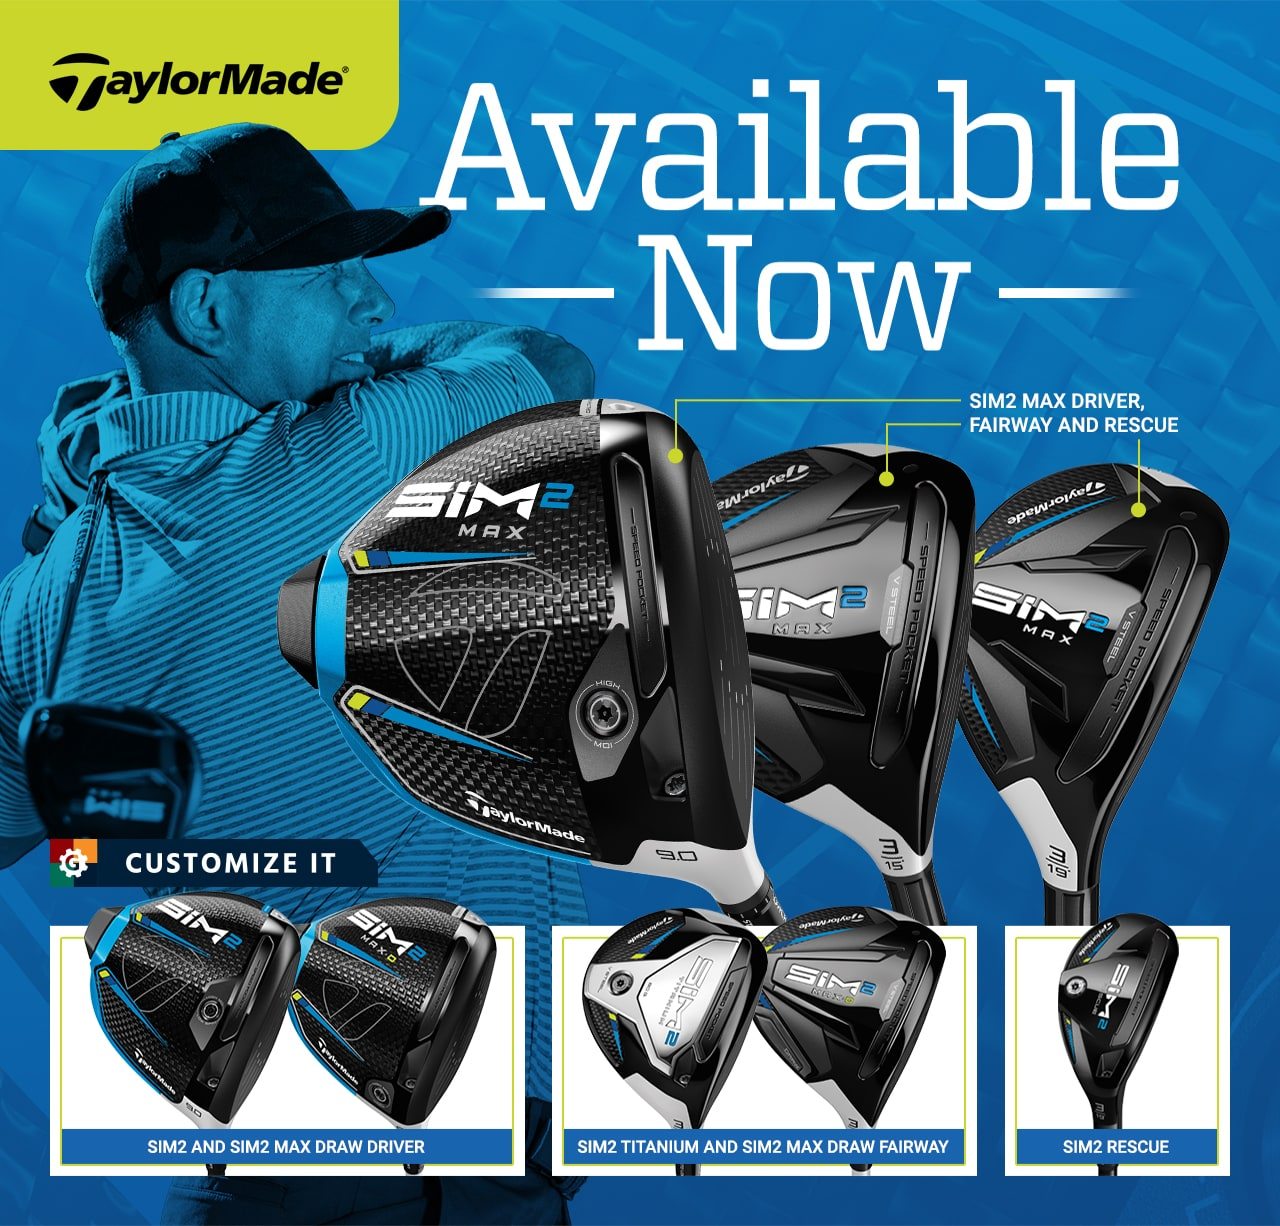 Available now. TaylorMade SIM2 Max Driver, Fairway and Rescue. TaylorMade SIM2 and SIM2 Max Draw Driver. TaylorMade SIM2 Titanium and SIM2 Max Draw Fairway. TaylorMade SIM2 Rescue. Customize it.